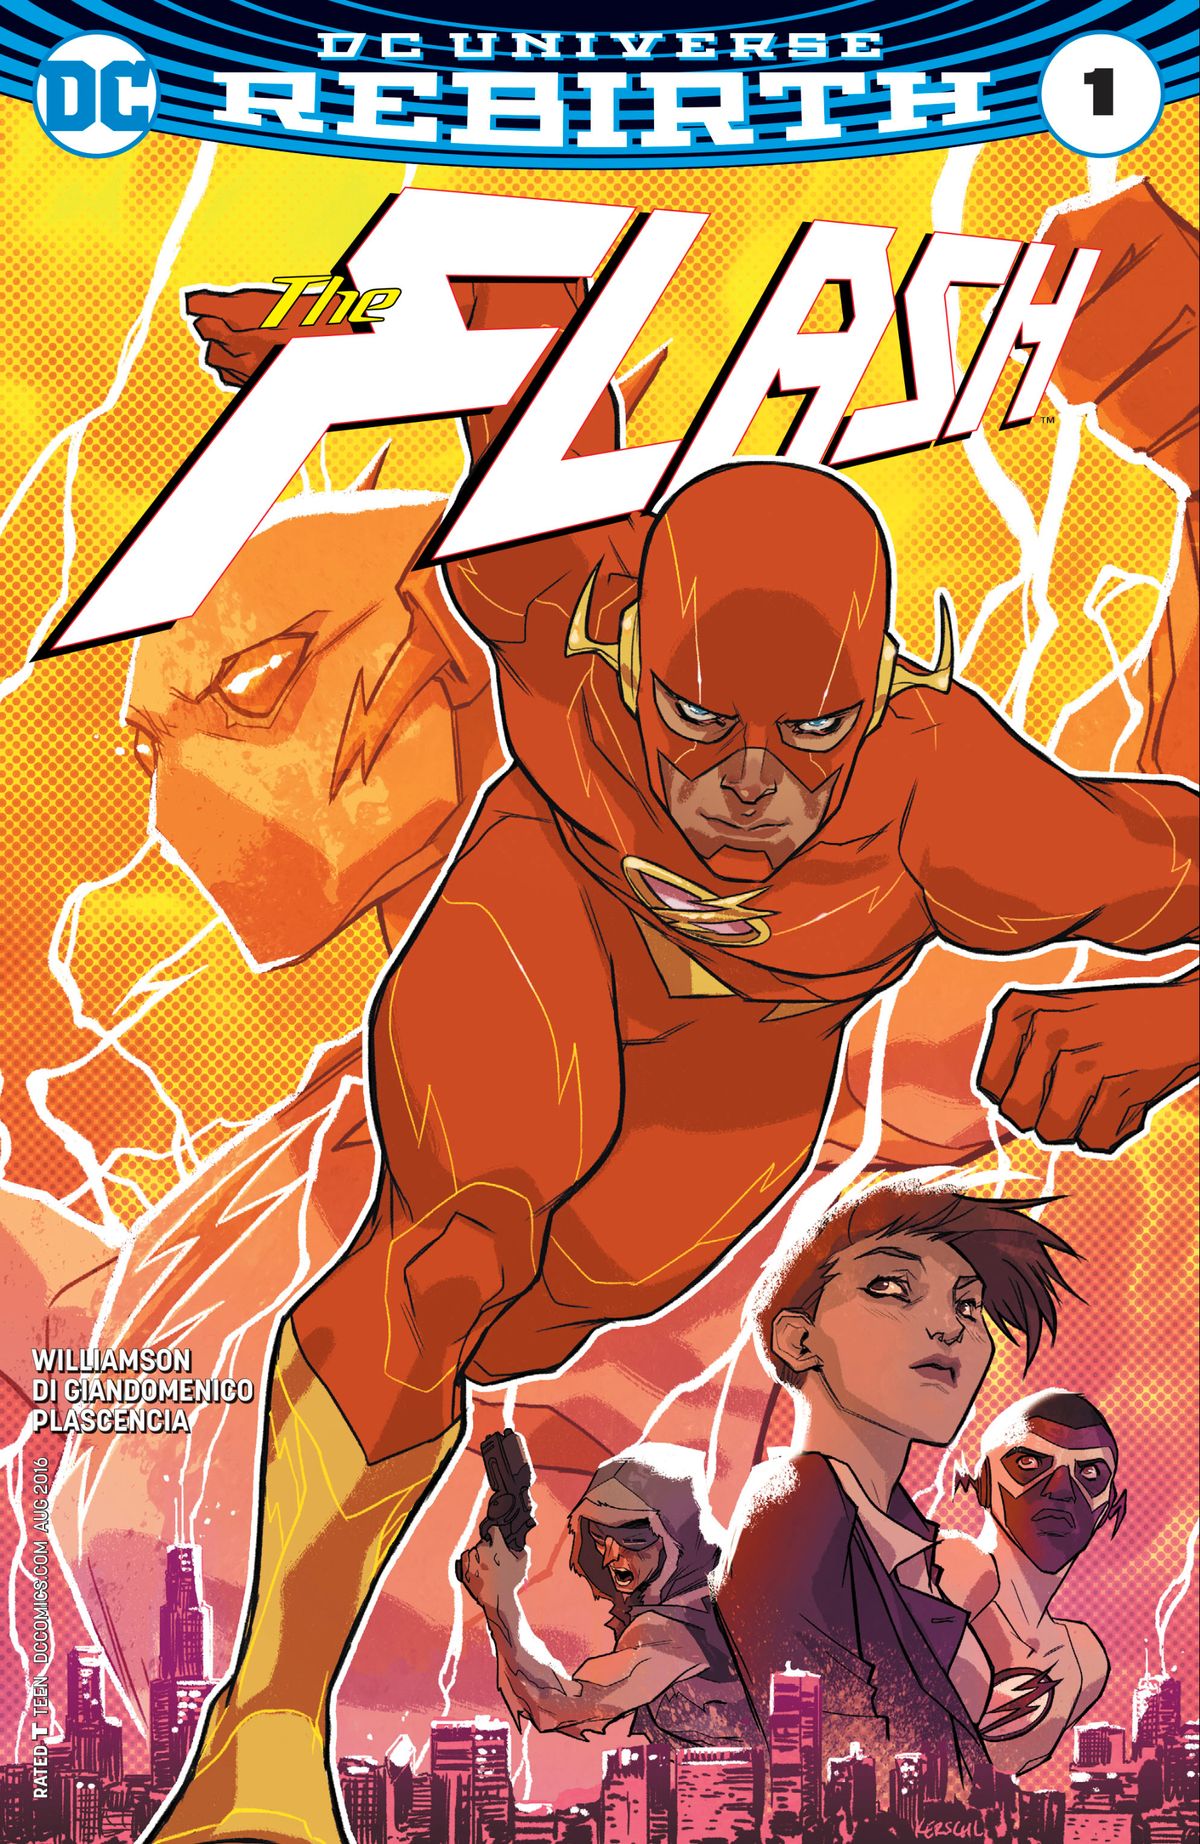 The Flash dashes through a lightning storm on the cover of The Flash #1, DC Comics (2016). 